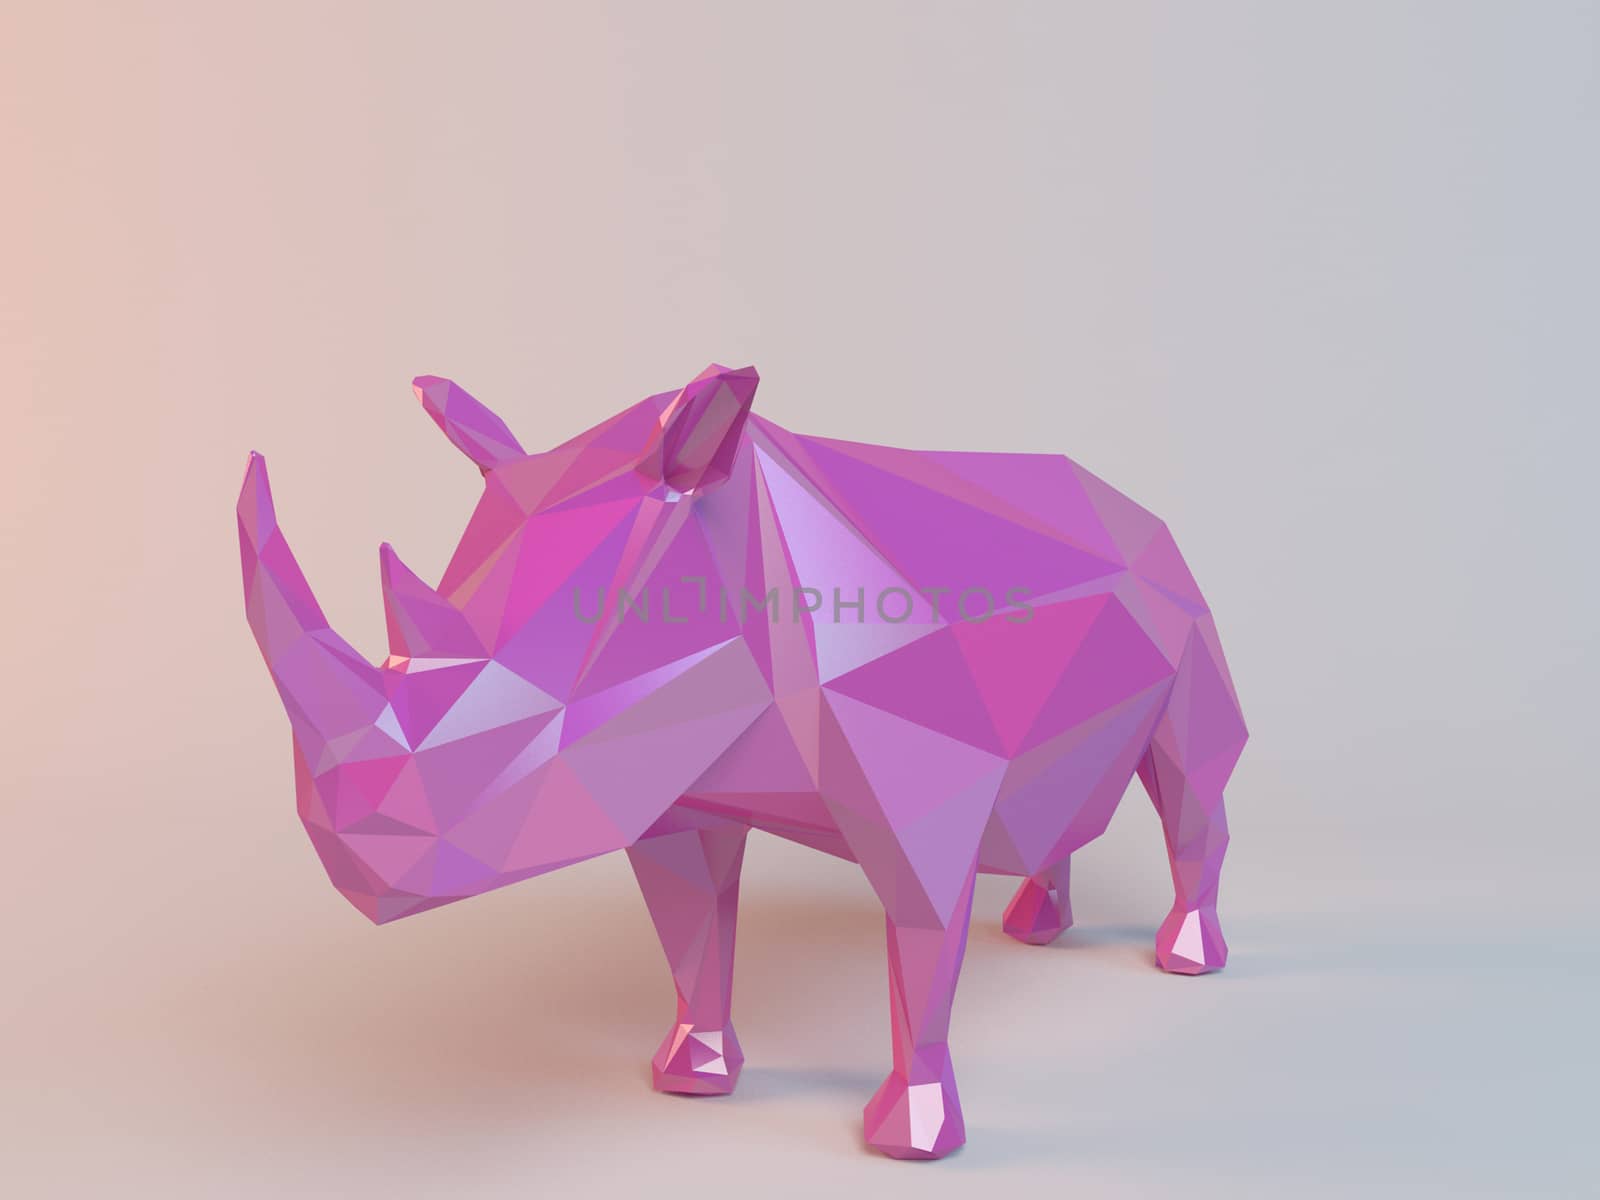 3D pink low poly (rhinoceros) inside a white stage with high render quality to be used as a logo, medal, symbol, shape, emblem, icon, children story, or any other use.